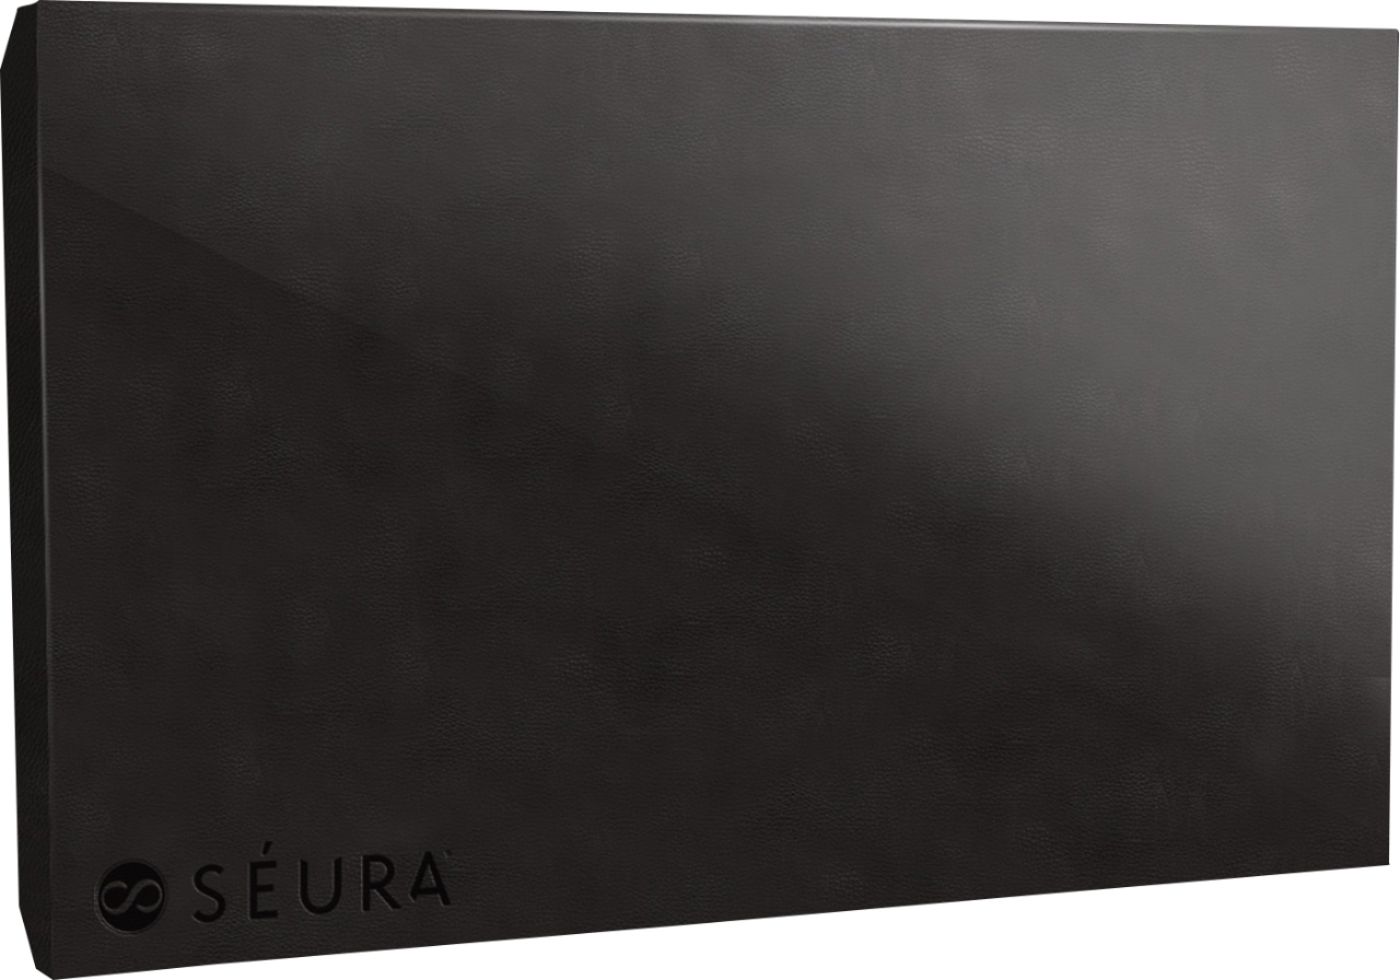 Angle View: Seura - TV Cover for Séura 65" Ultra Bright with Speaker Bar - Black